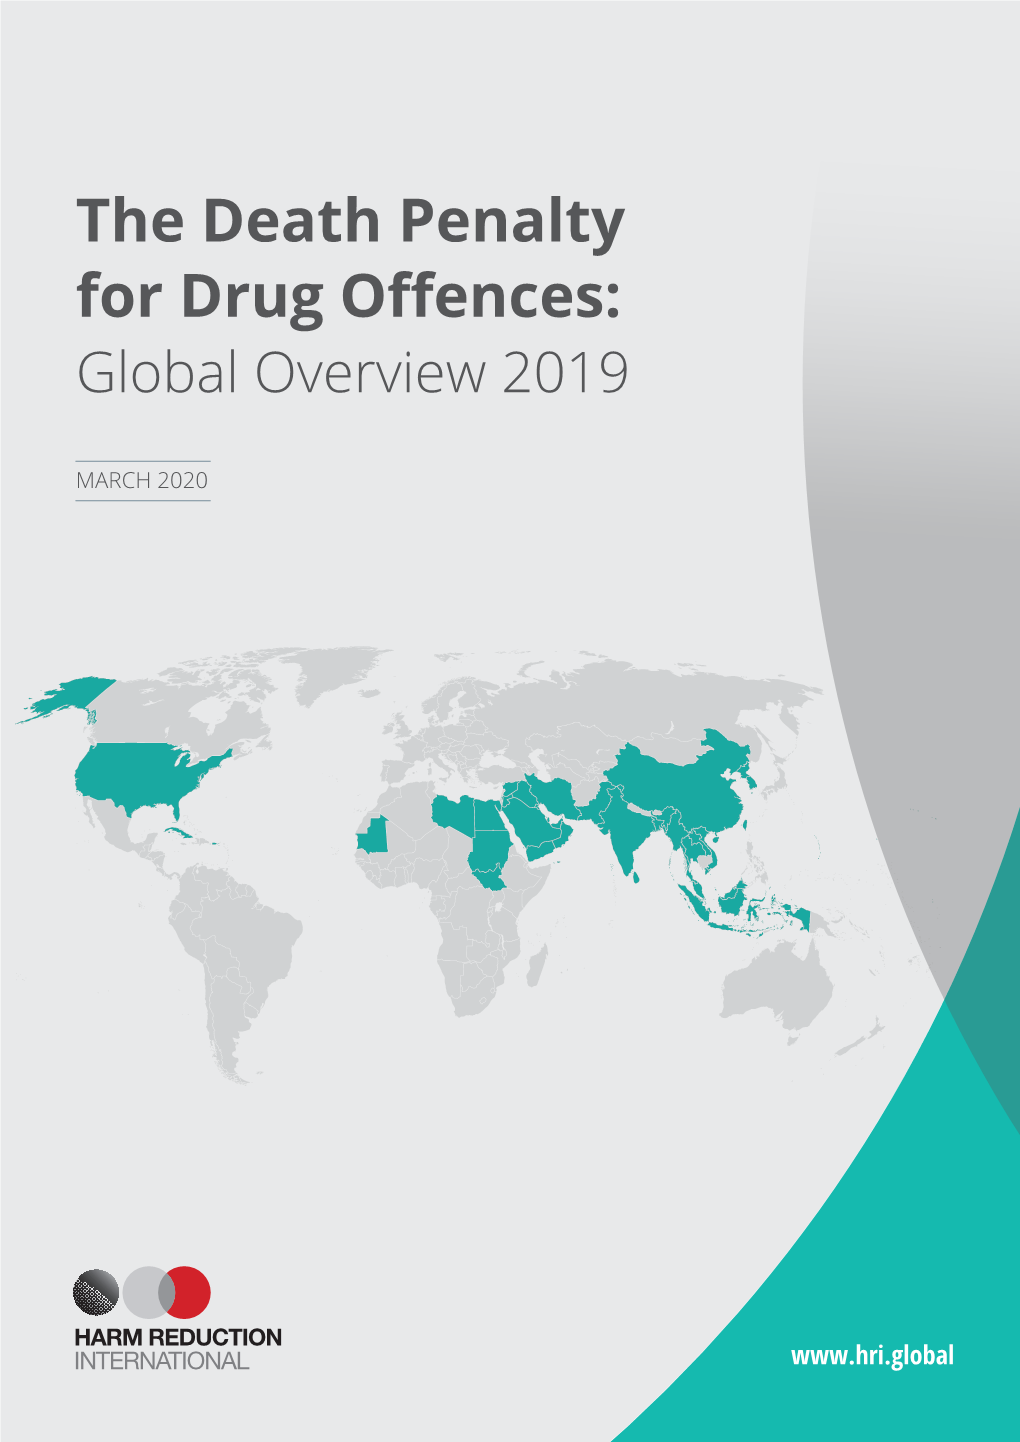 The Death Penalty for Drug Offences: Global Overview 2019